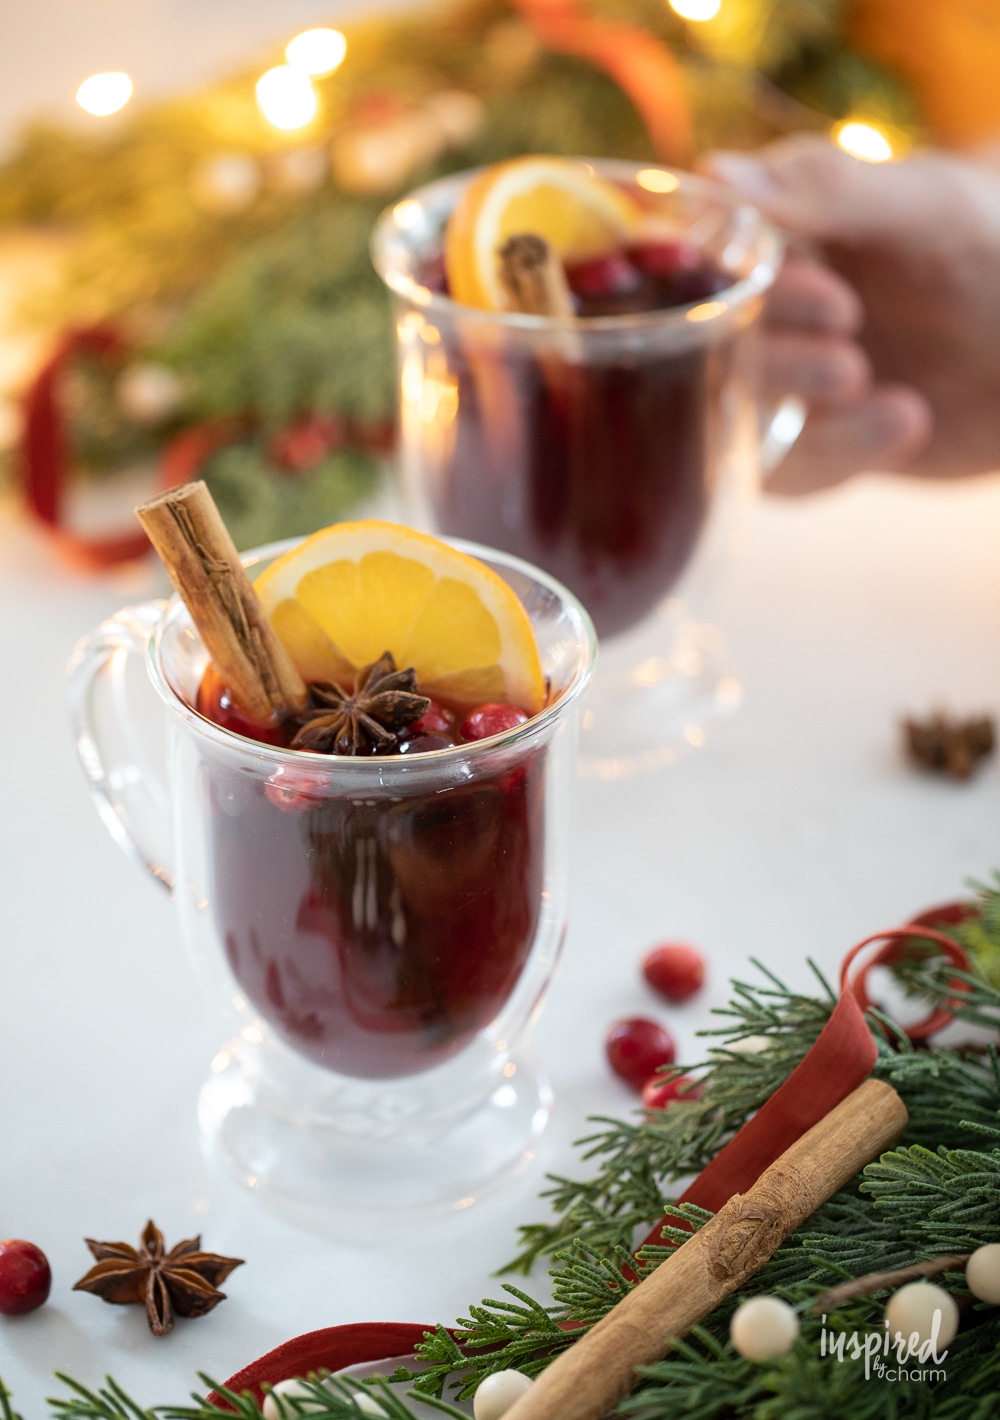 spiced cranberry hot toddies in glass mugs with hand holding one.